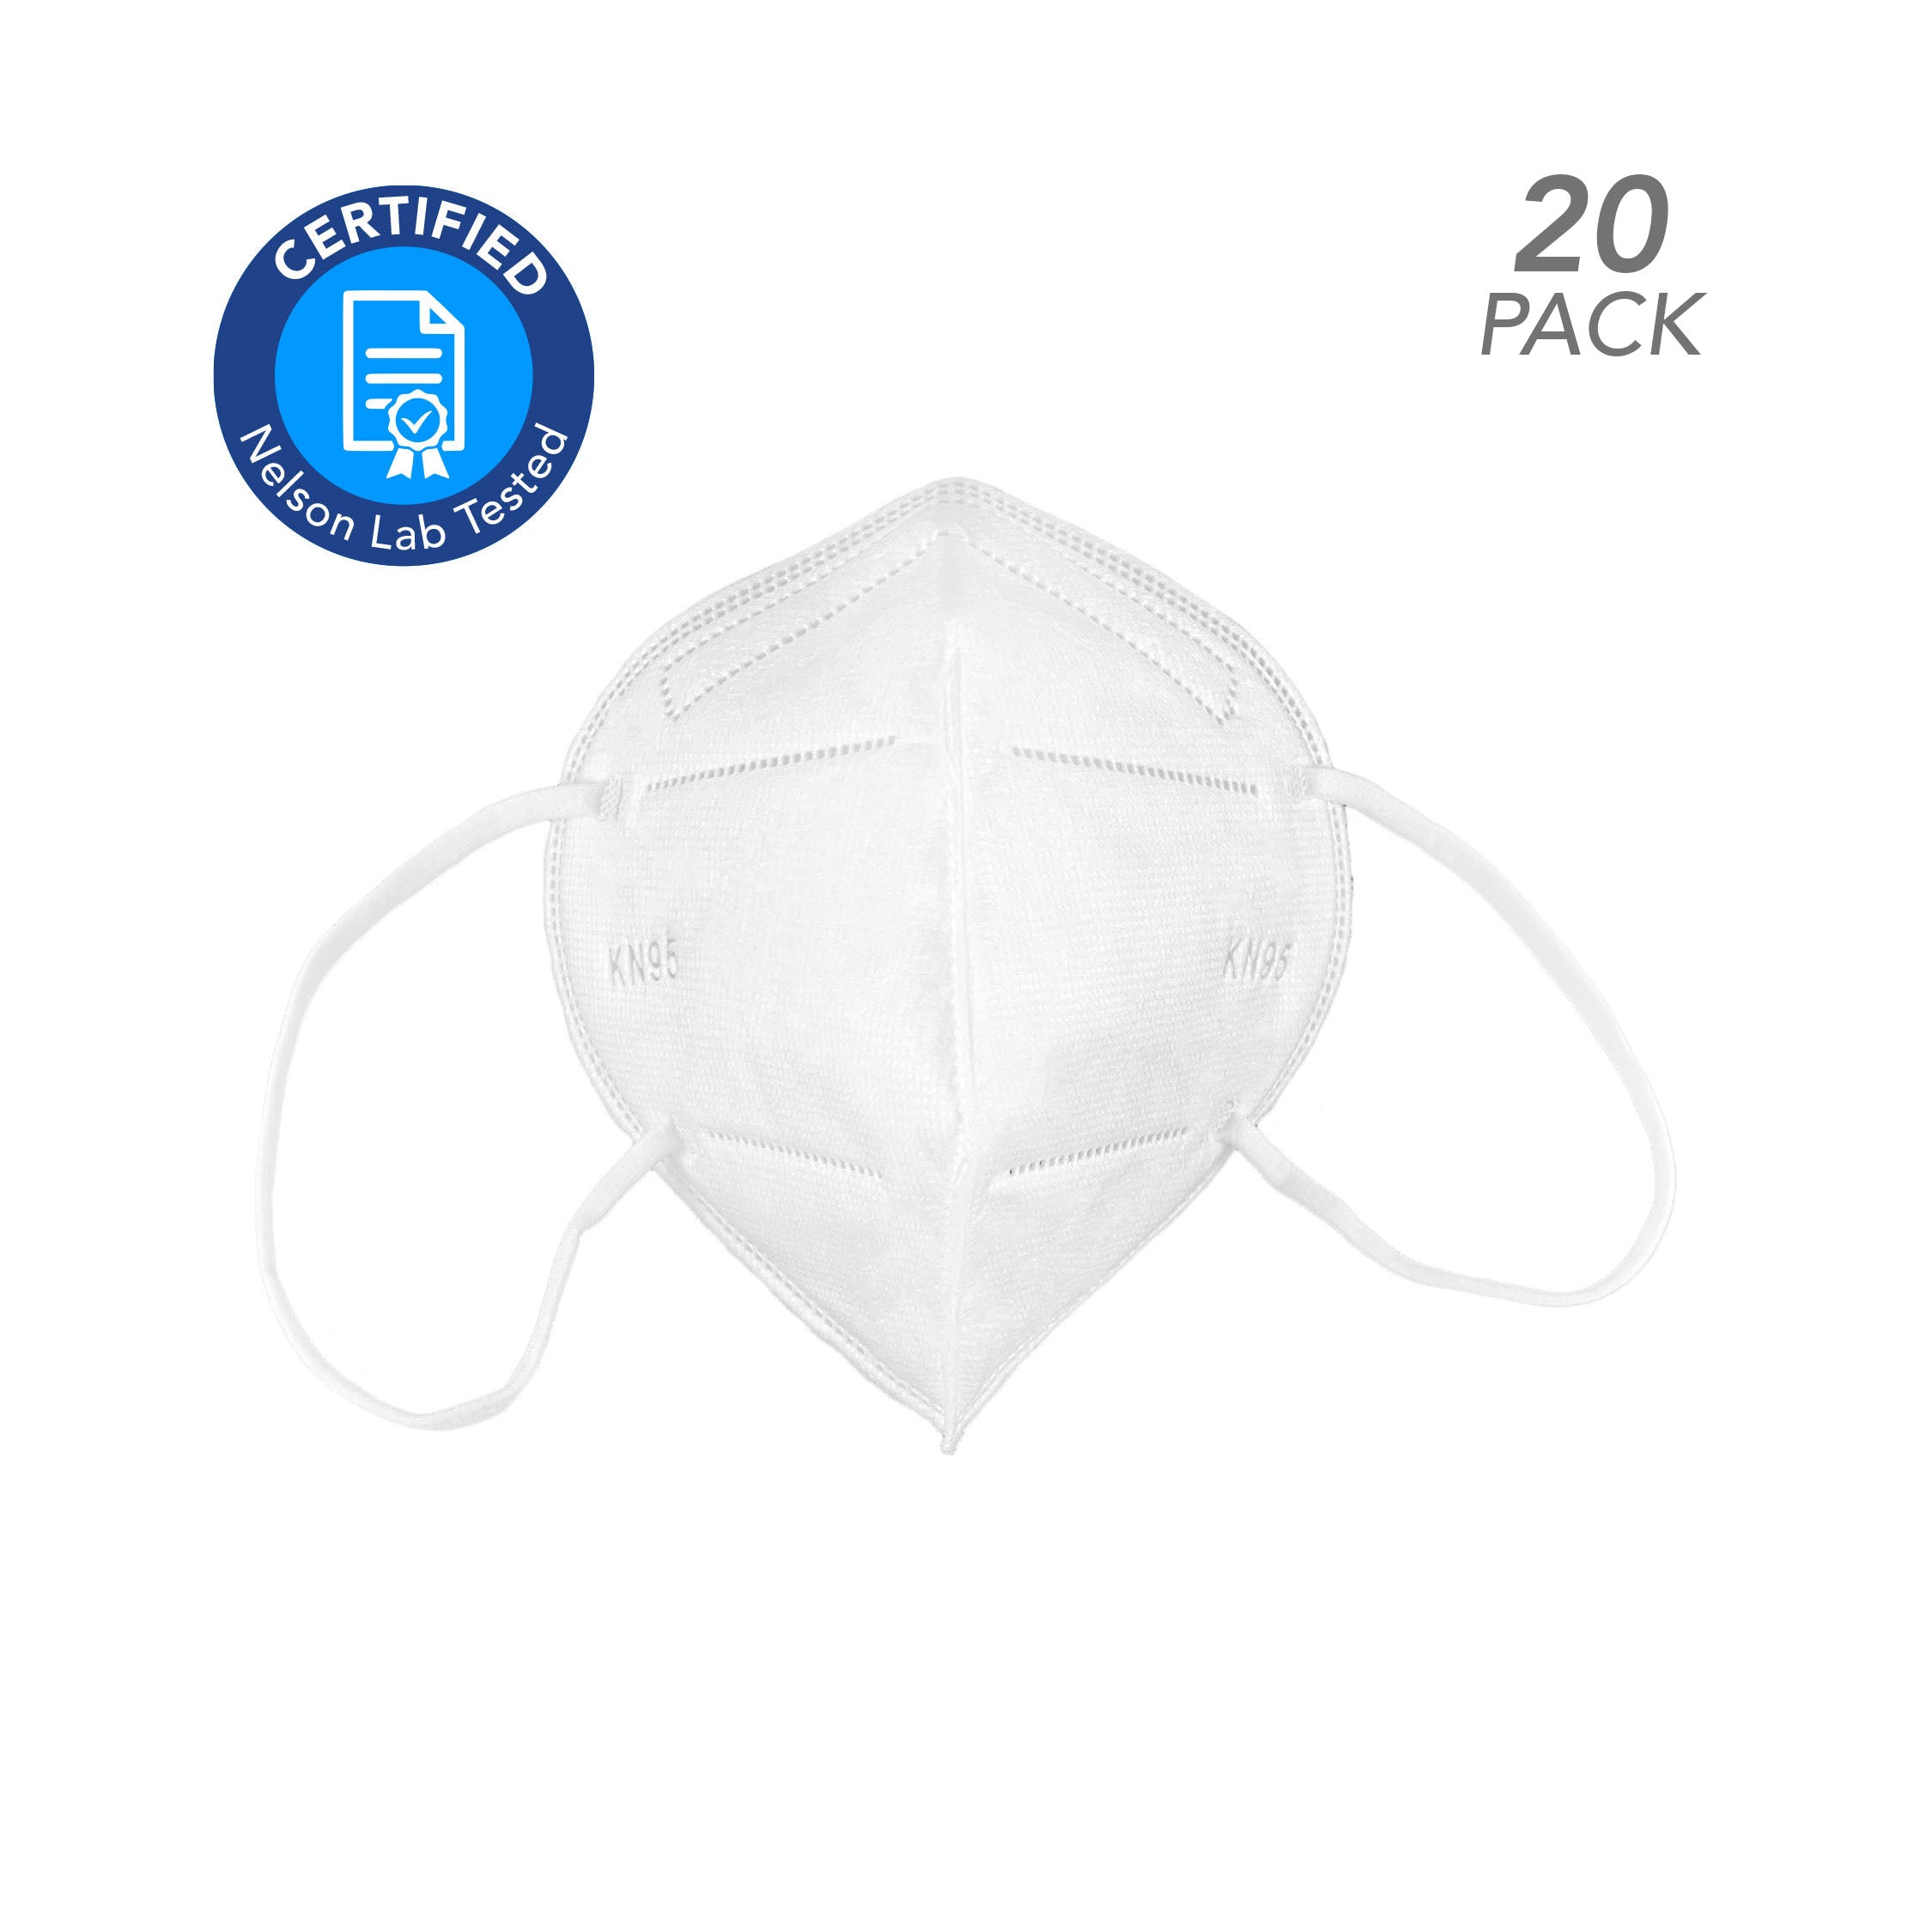 20 Pack - Kn95/ffp2 4-layer Fitted Disposable Mask